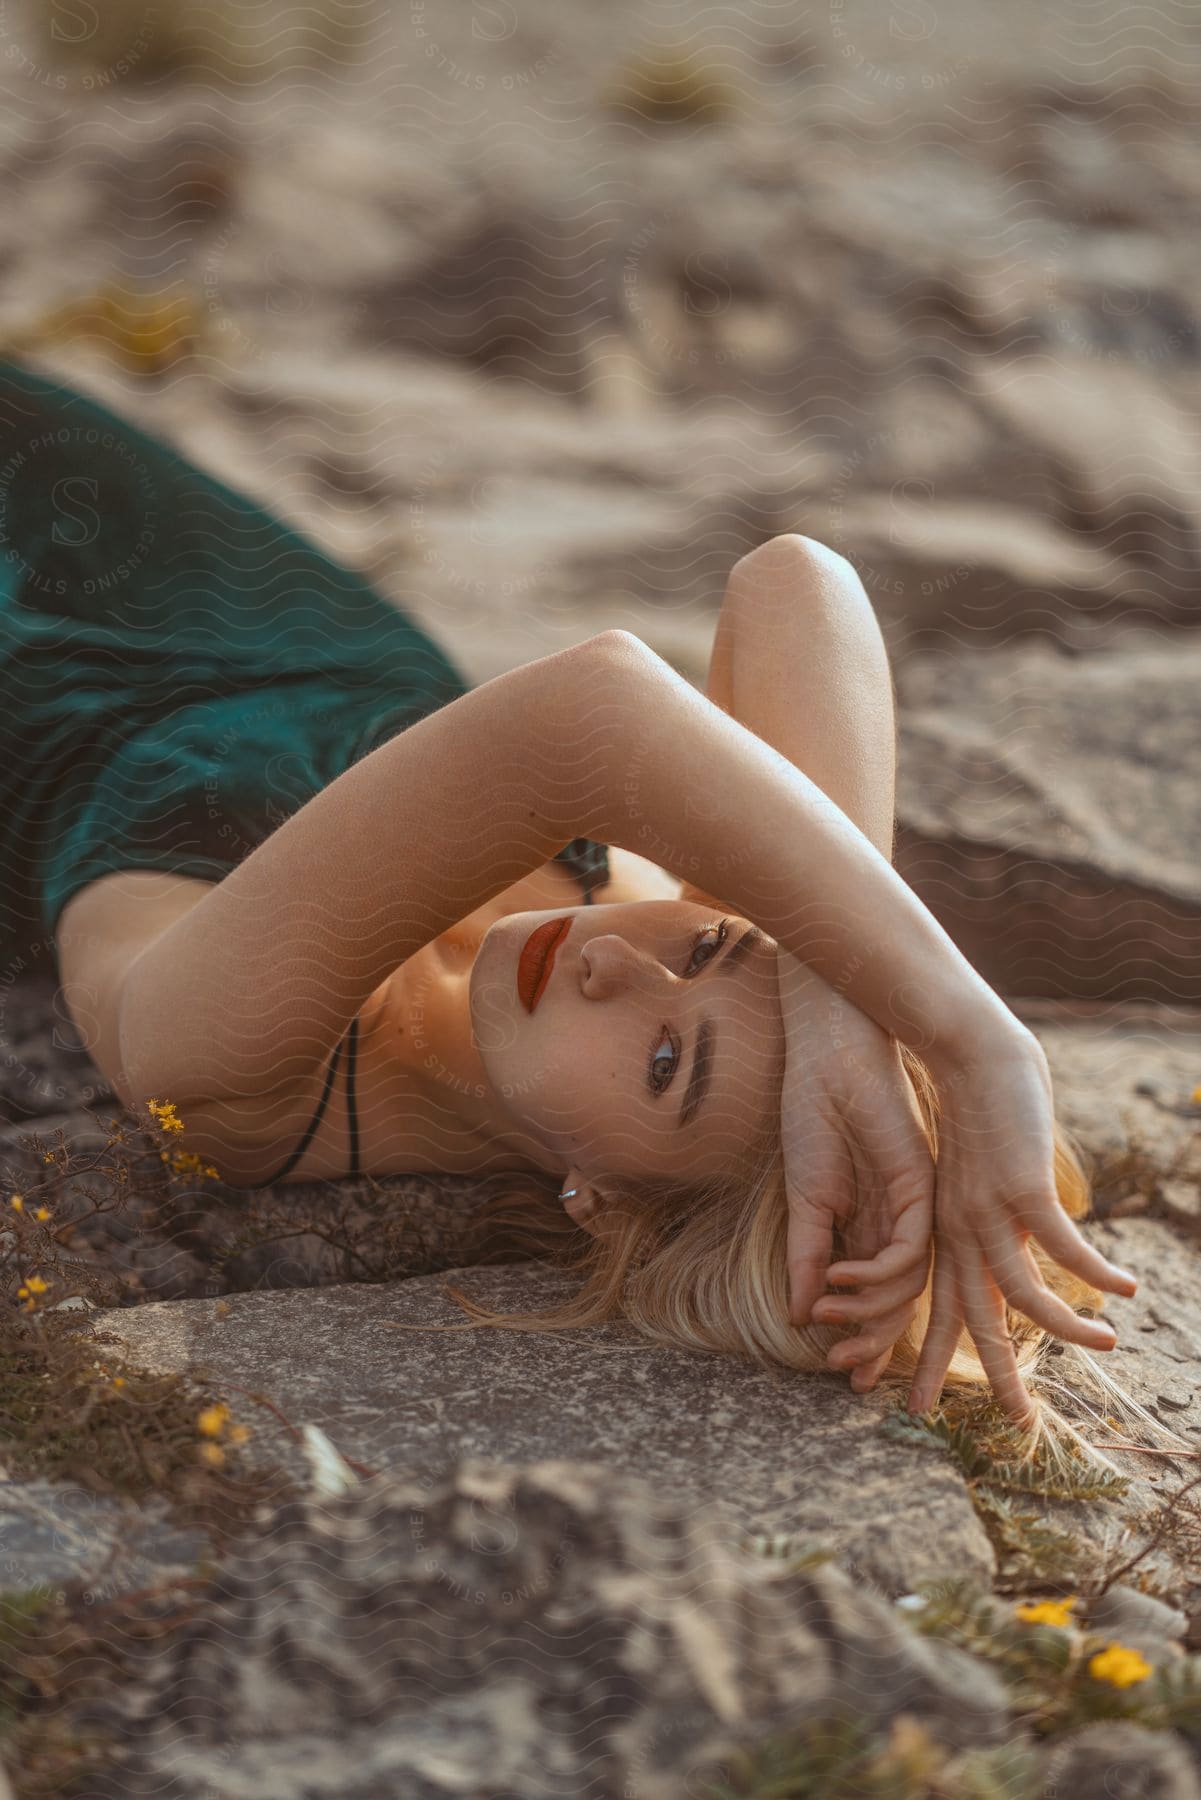 A blonde model in a green gown and makeup posed on her back on stones in the sunlight